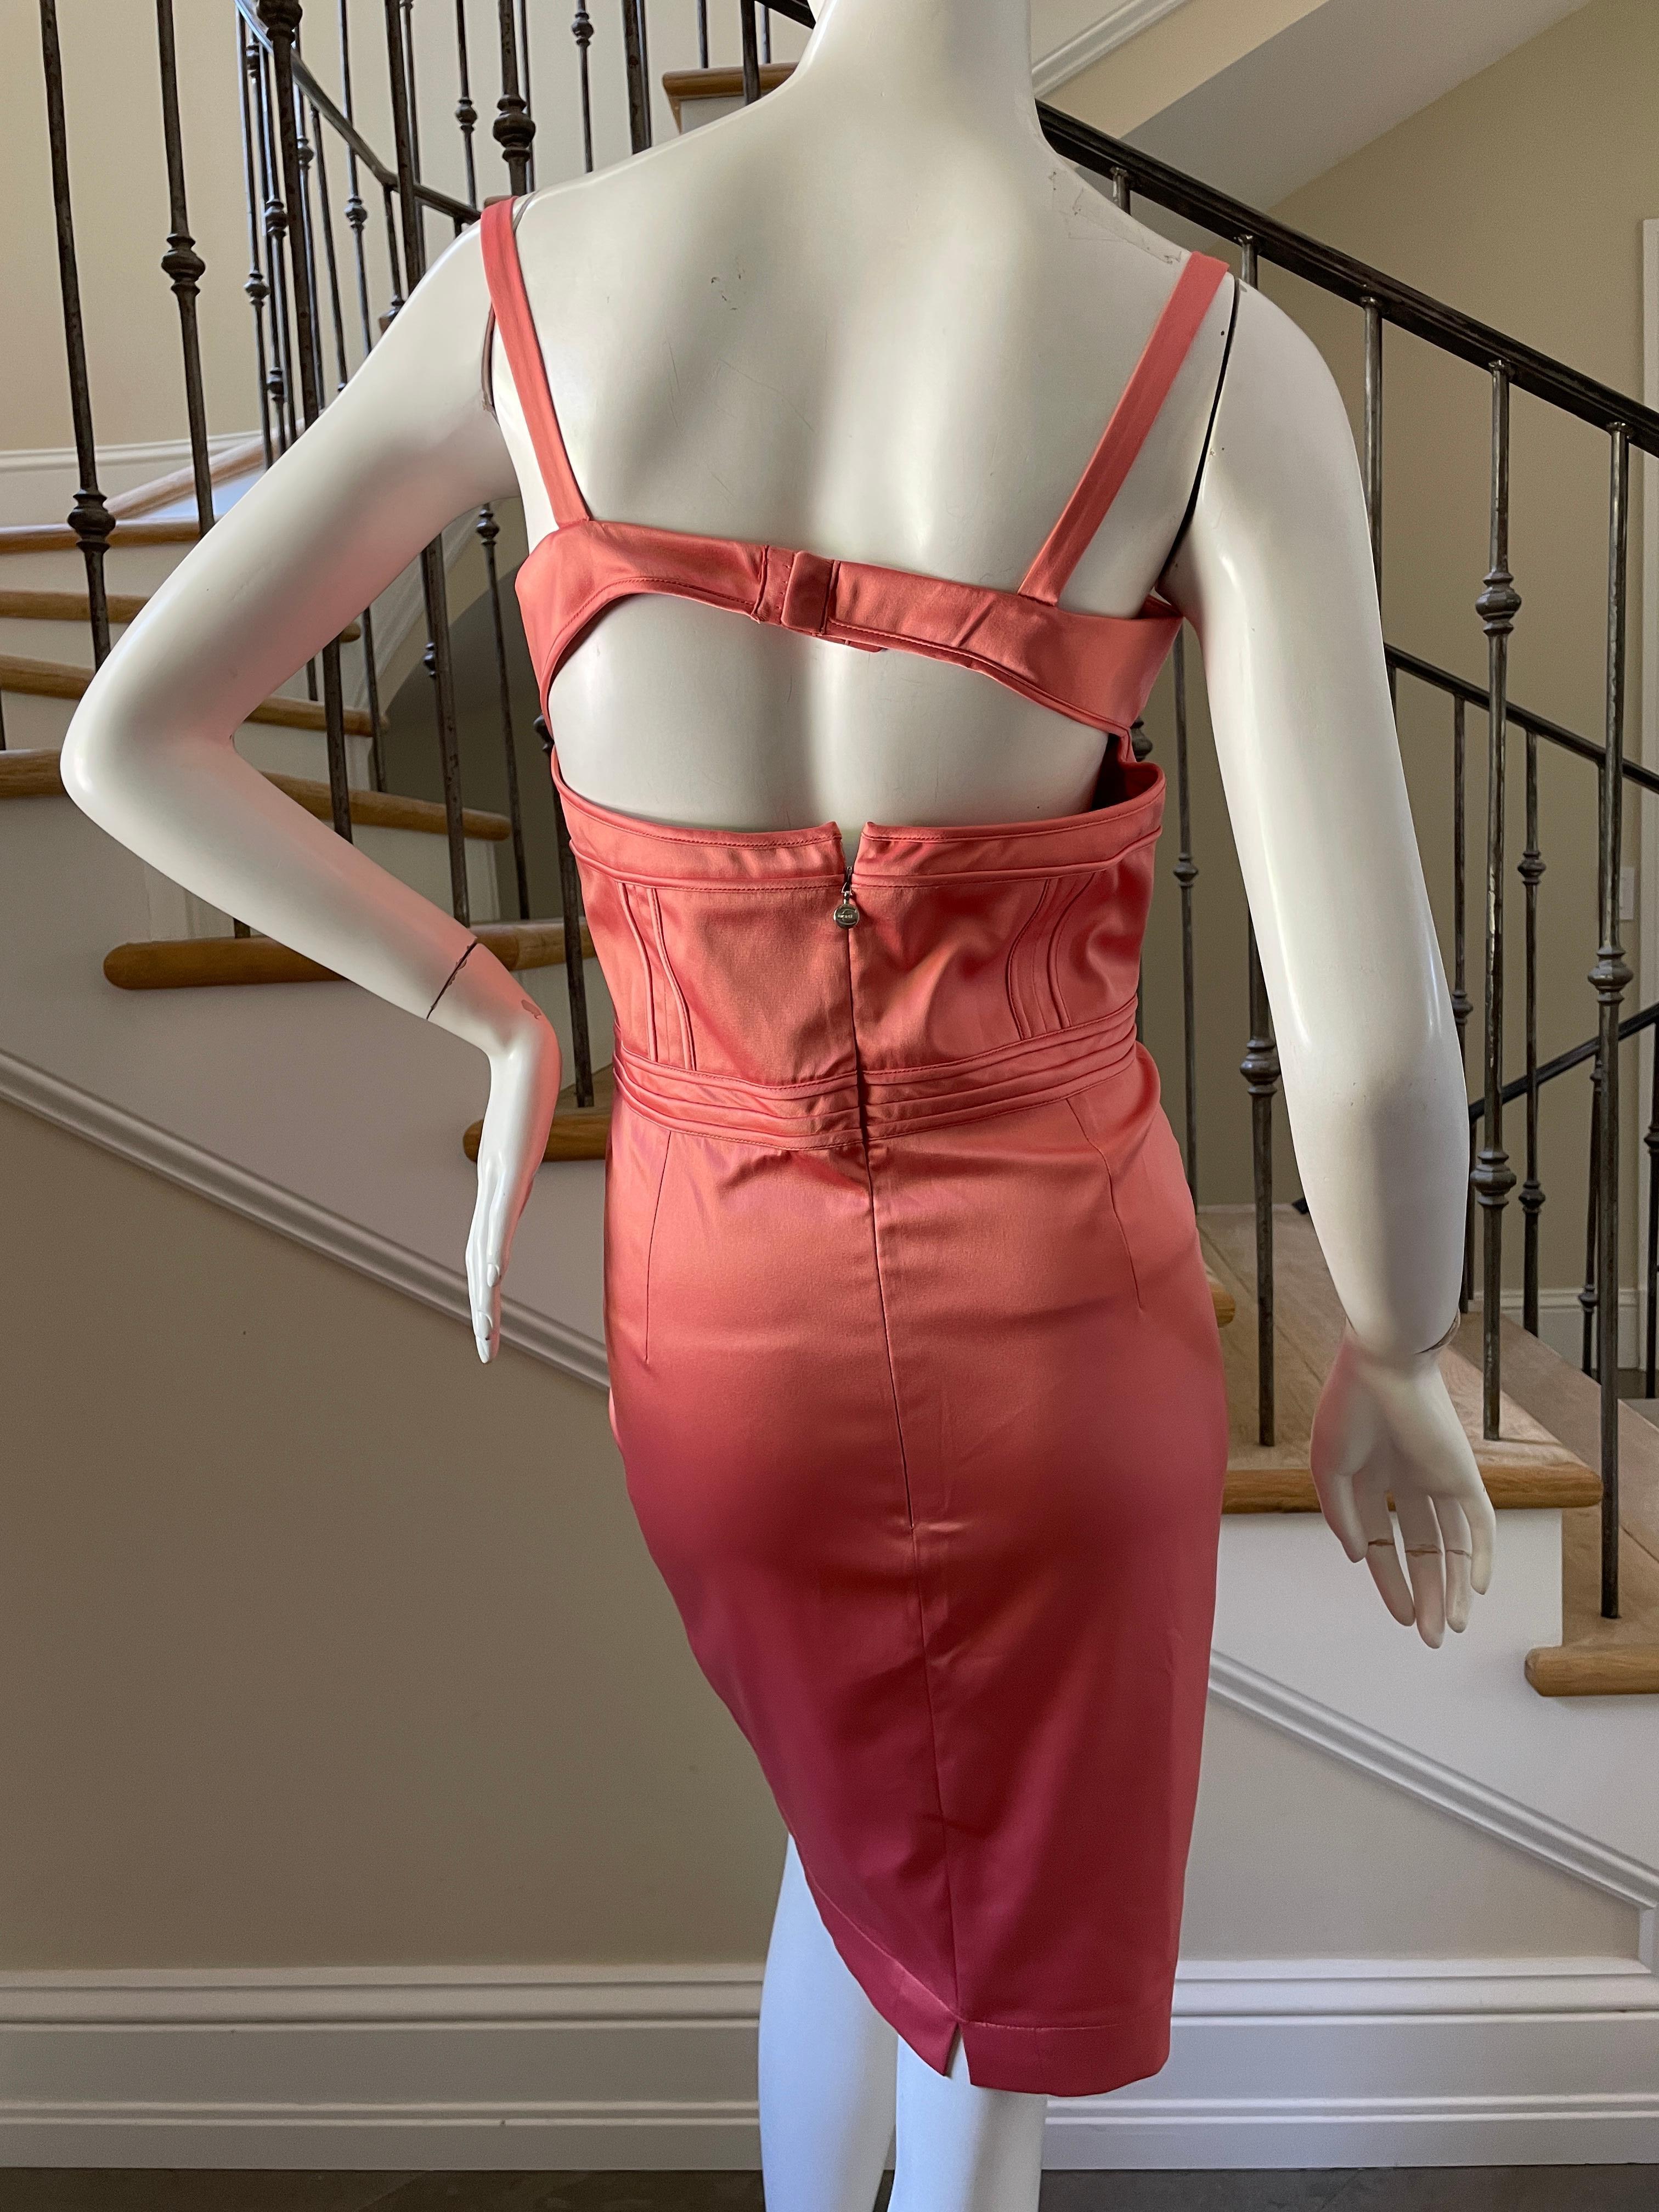 Just Cavalli Sexy Pink Corset Cocktail Dress by Roberto Cavalli New with Tags 44 For Sale 3